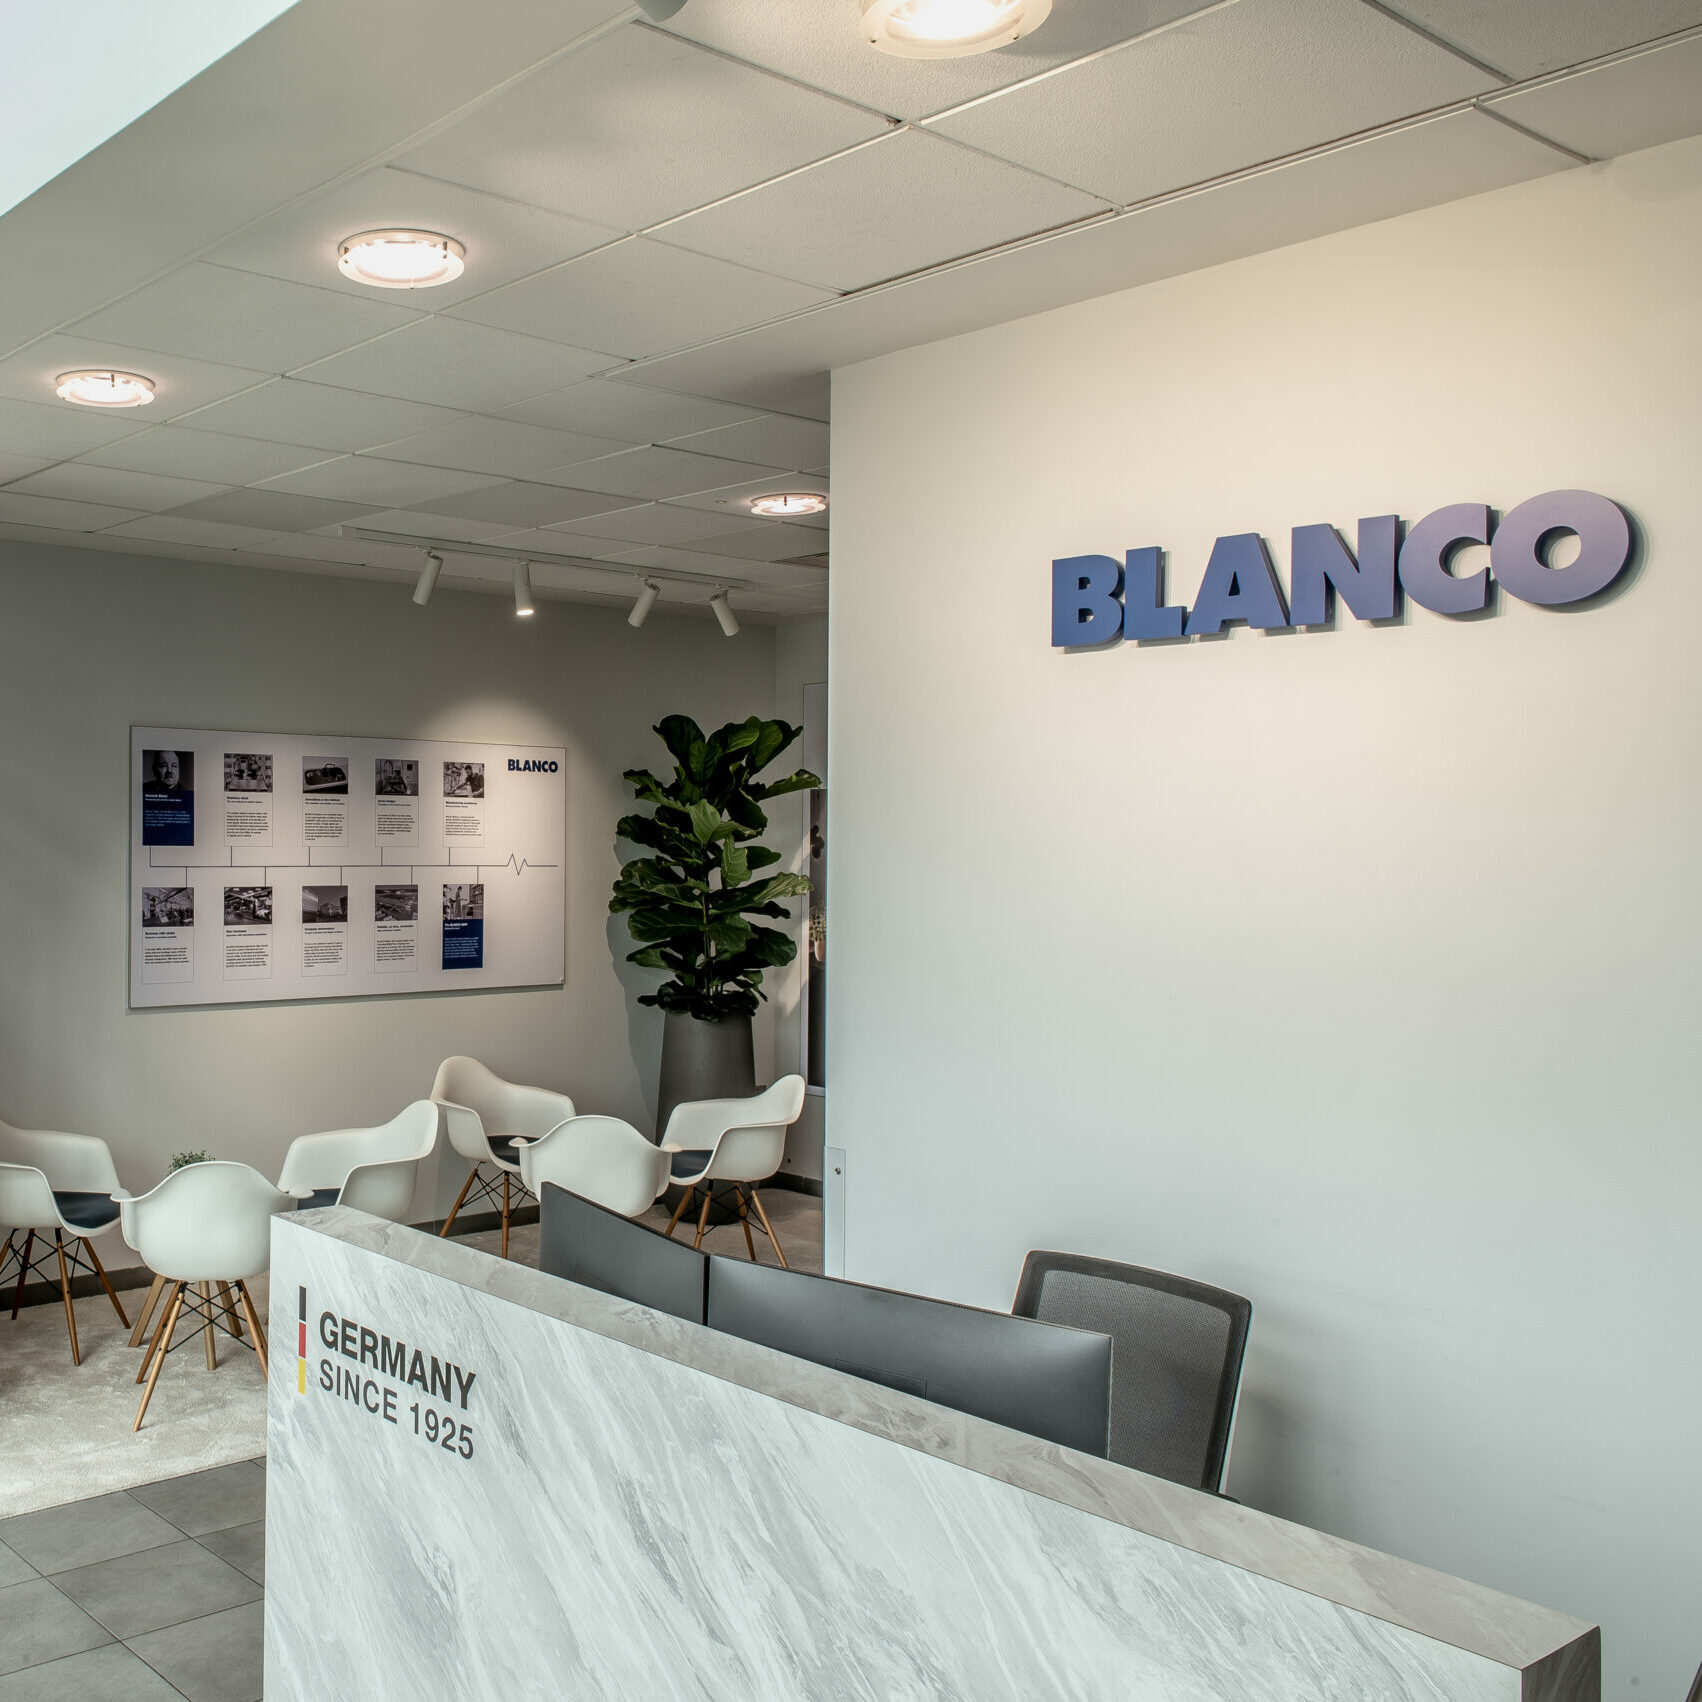 DFROST, Blanco, Brand Space, Customer Activation, POS